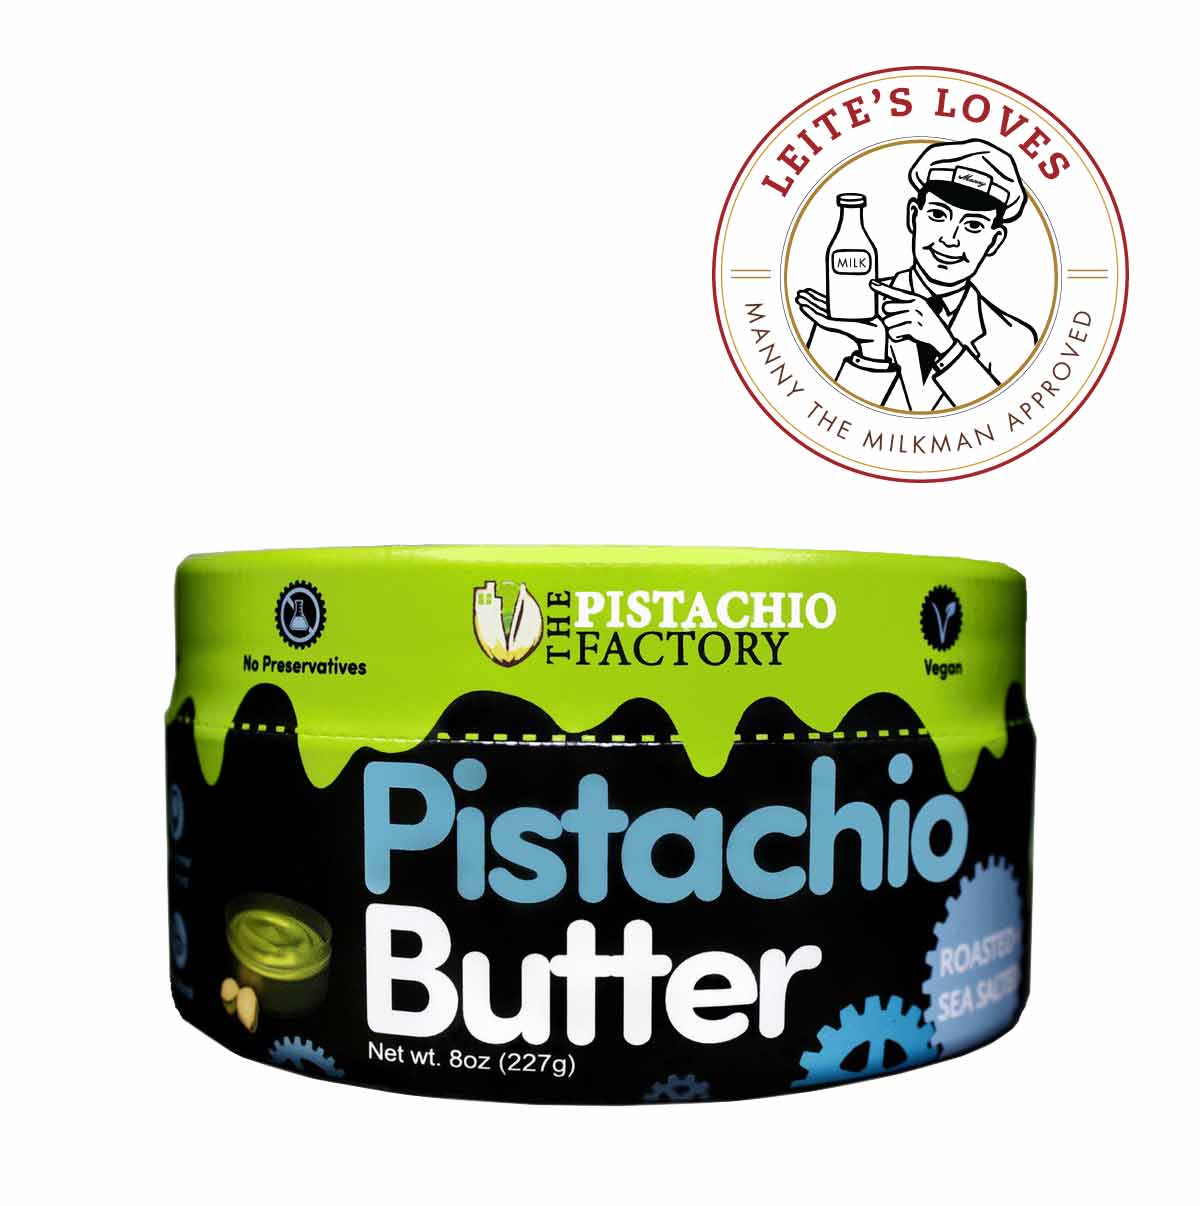 A black and green jar of The Pistachio Factory's pistachio butter.